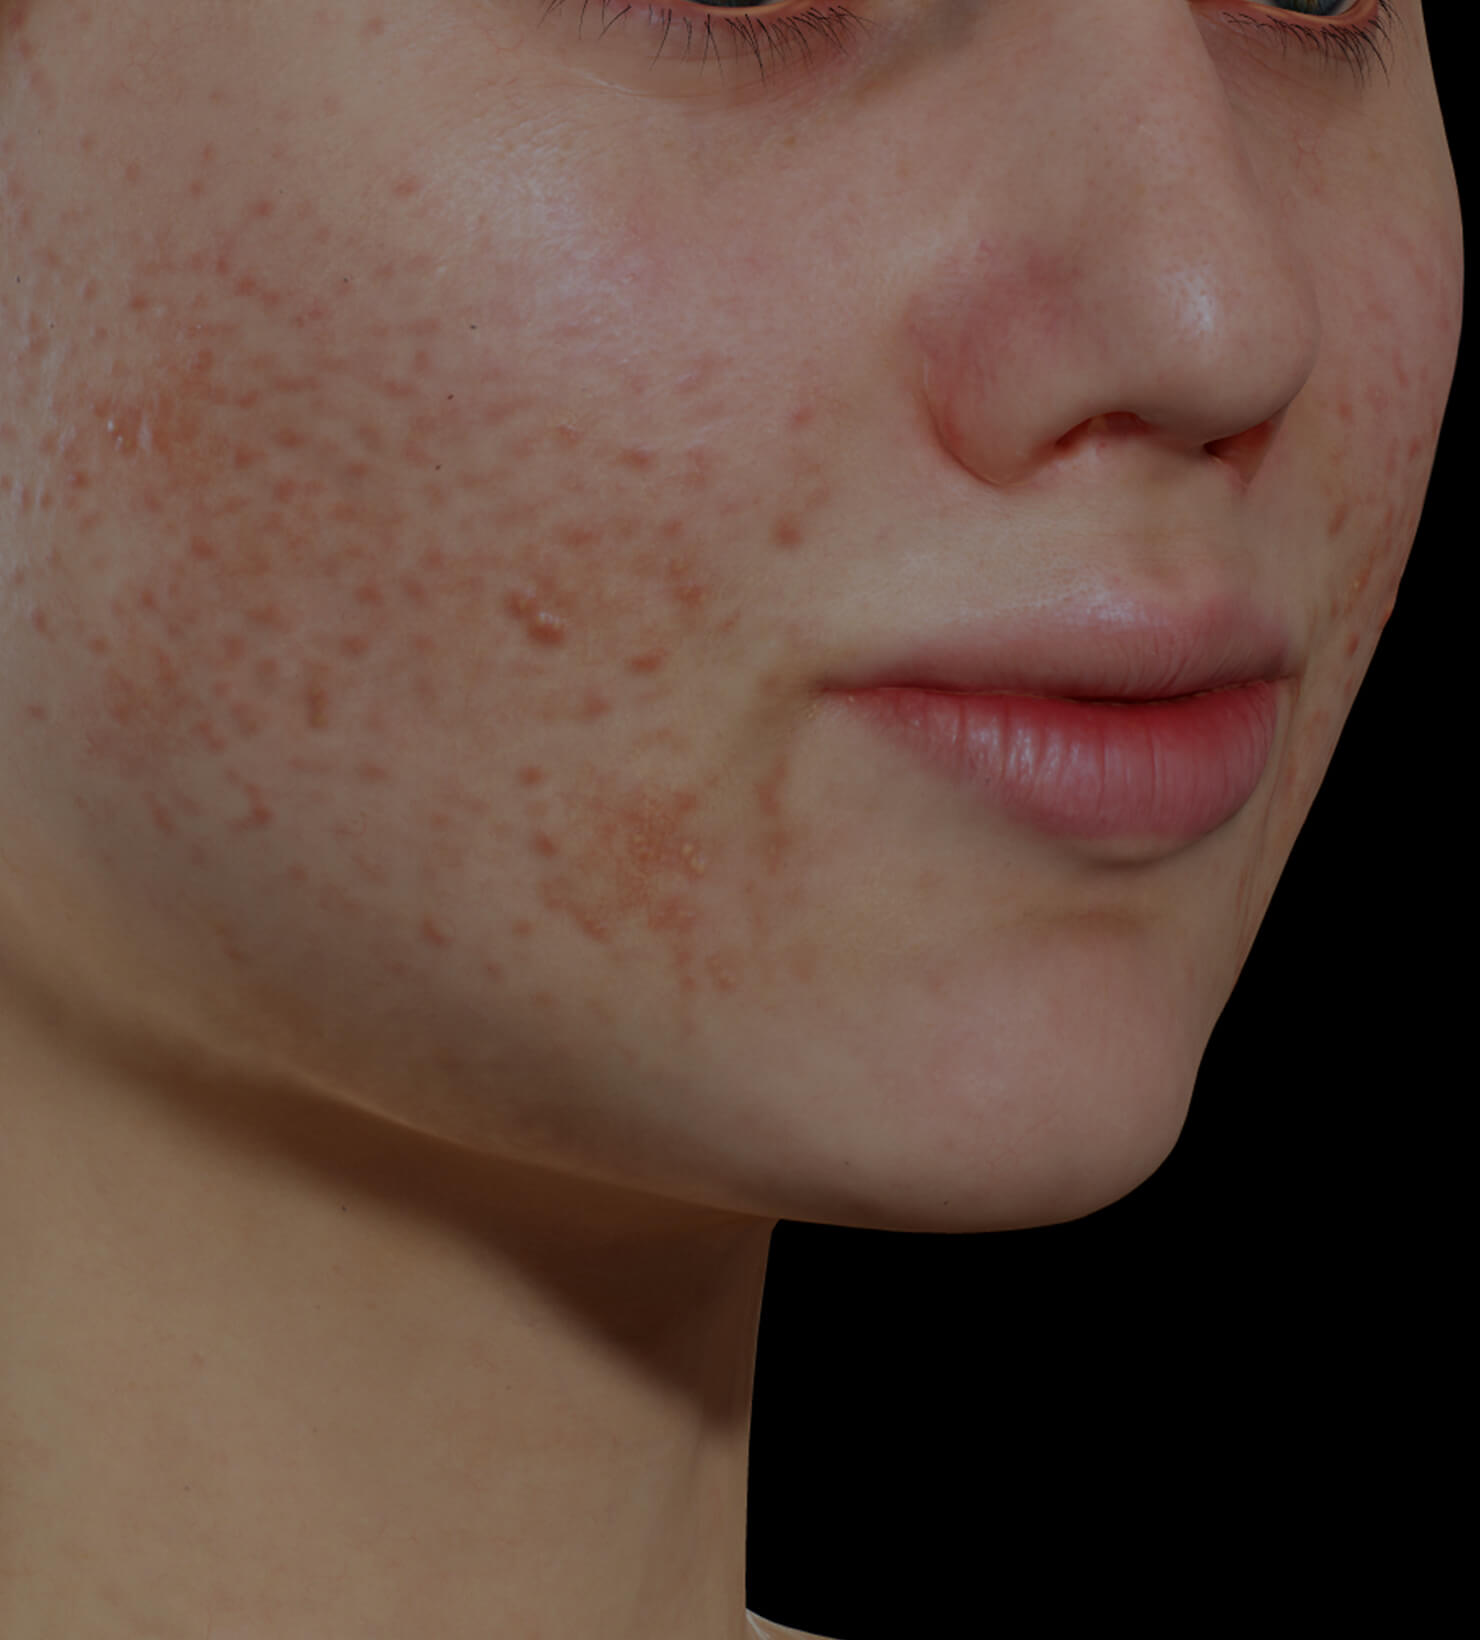 Young Clinique Chloé female patient with active acne on her face getting treated with the Vbeam pulsed dye laser